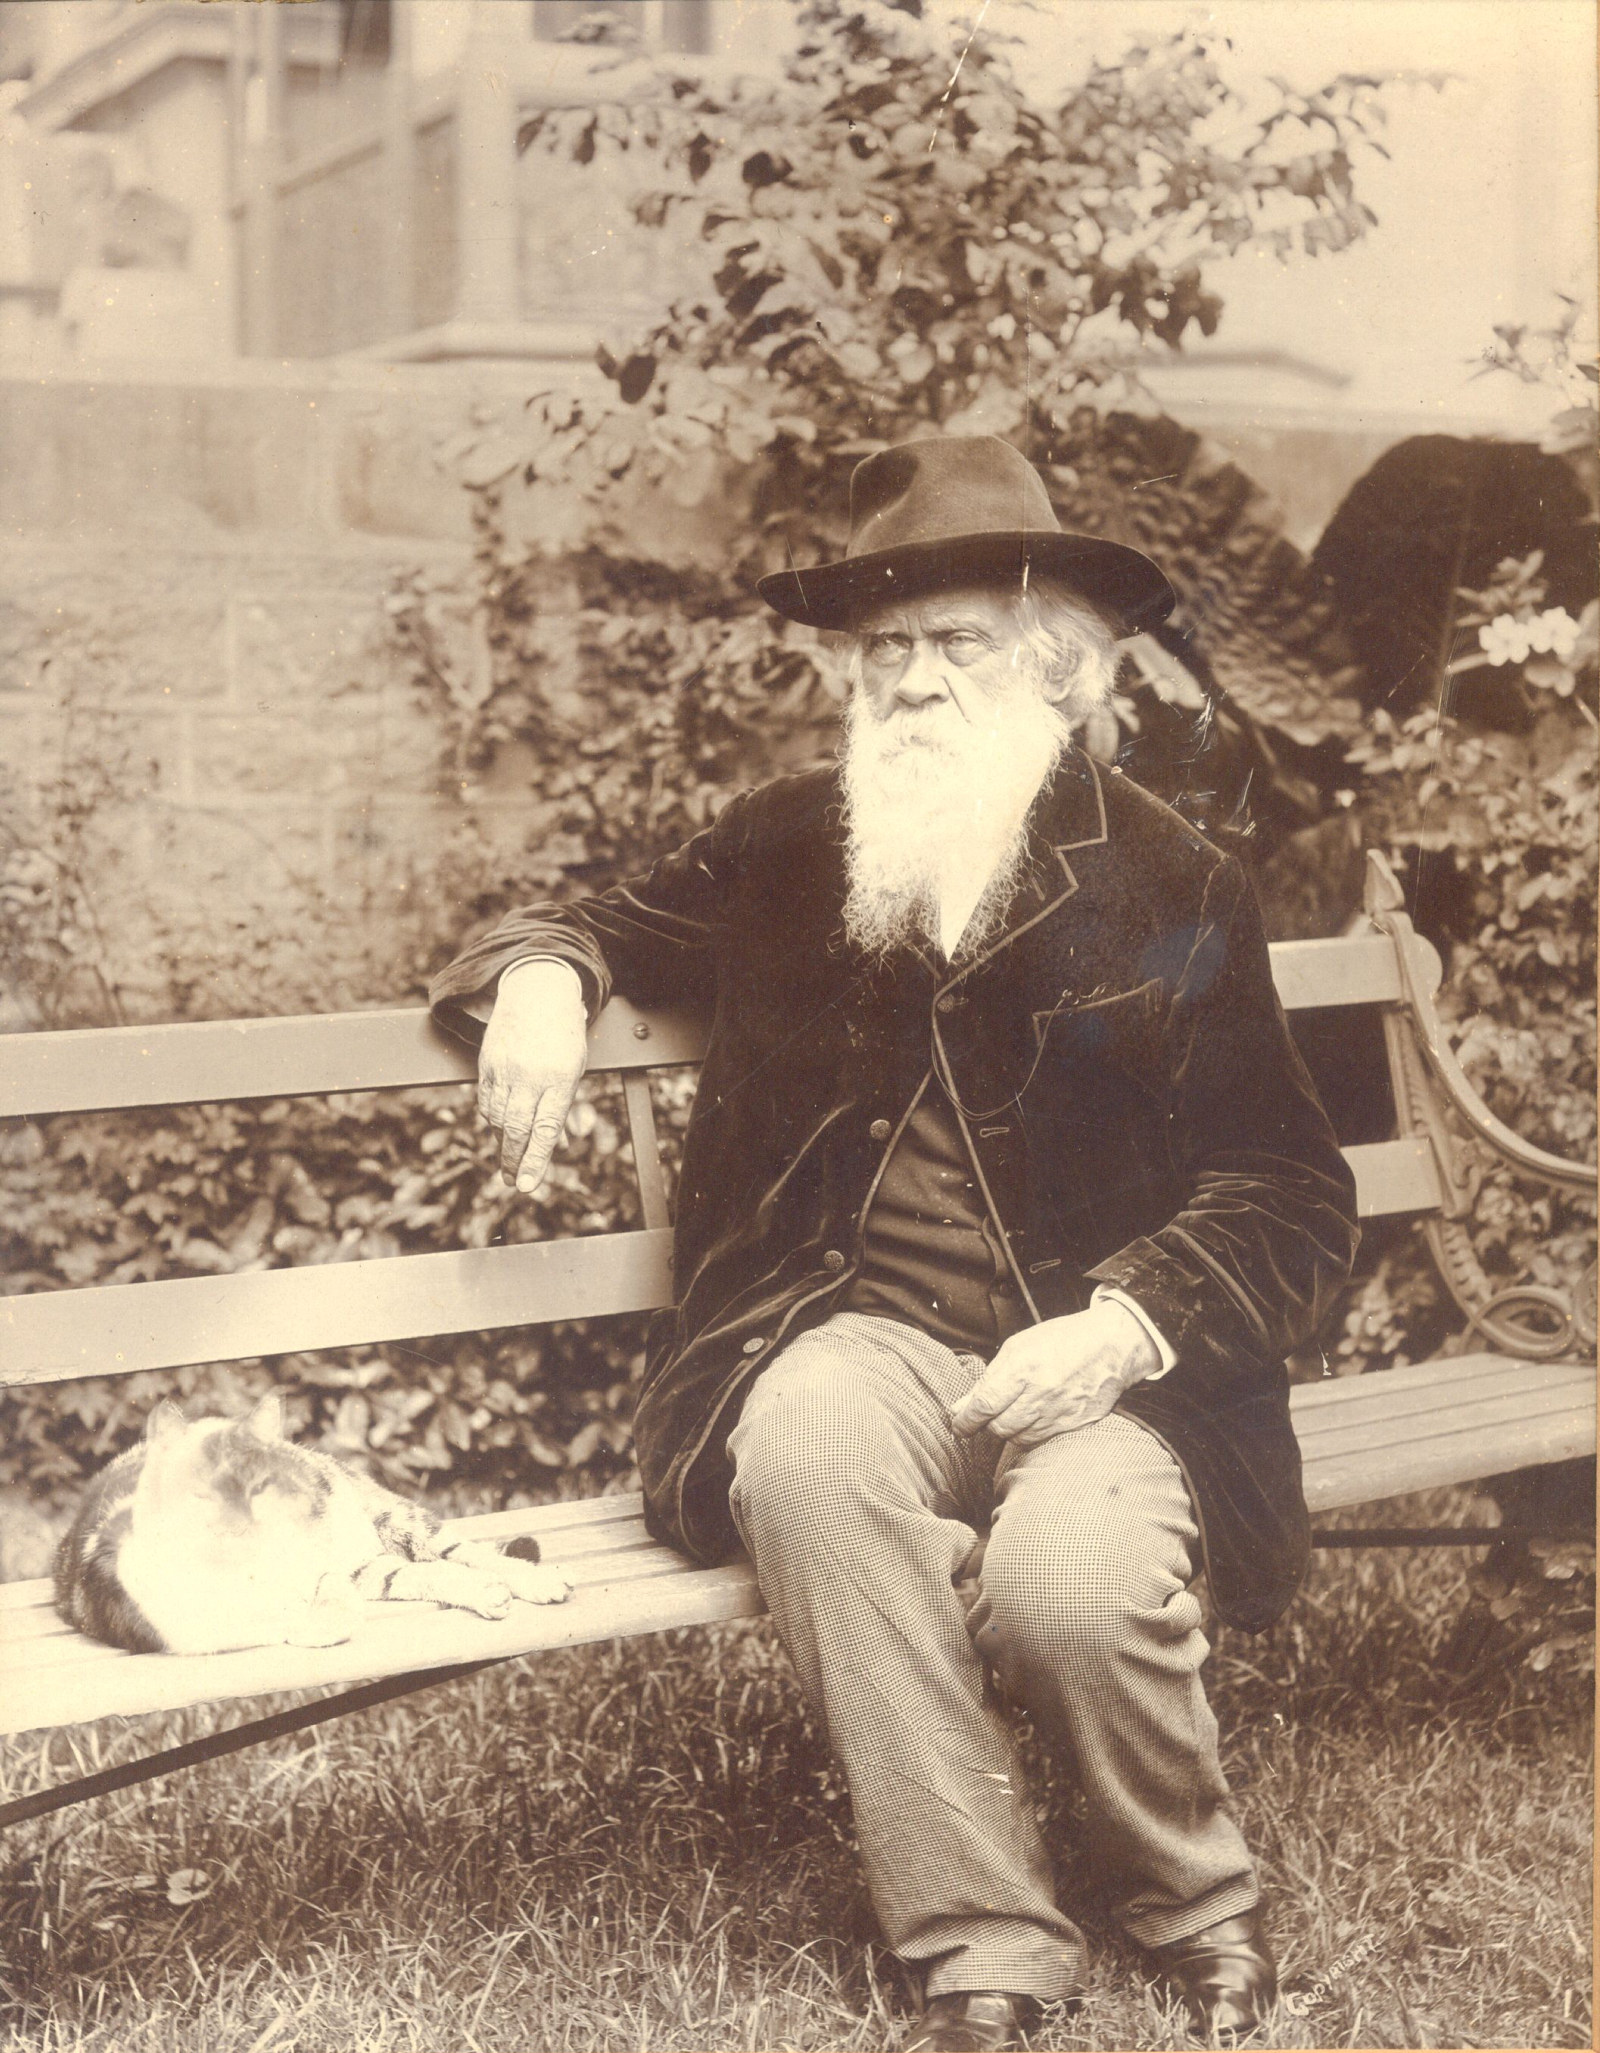 Sepia toned photo of an elderly man with a large flowing beard and hat, seated in a garden on a bench; a cat is seated on the bench on the LHS of the image